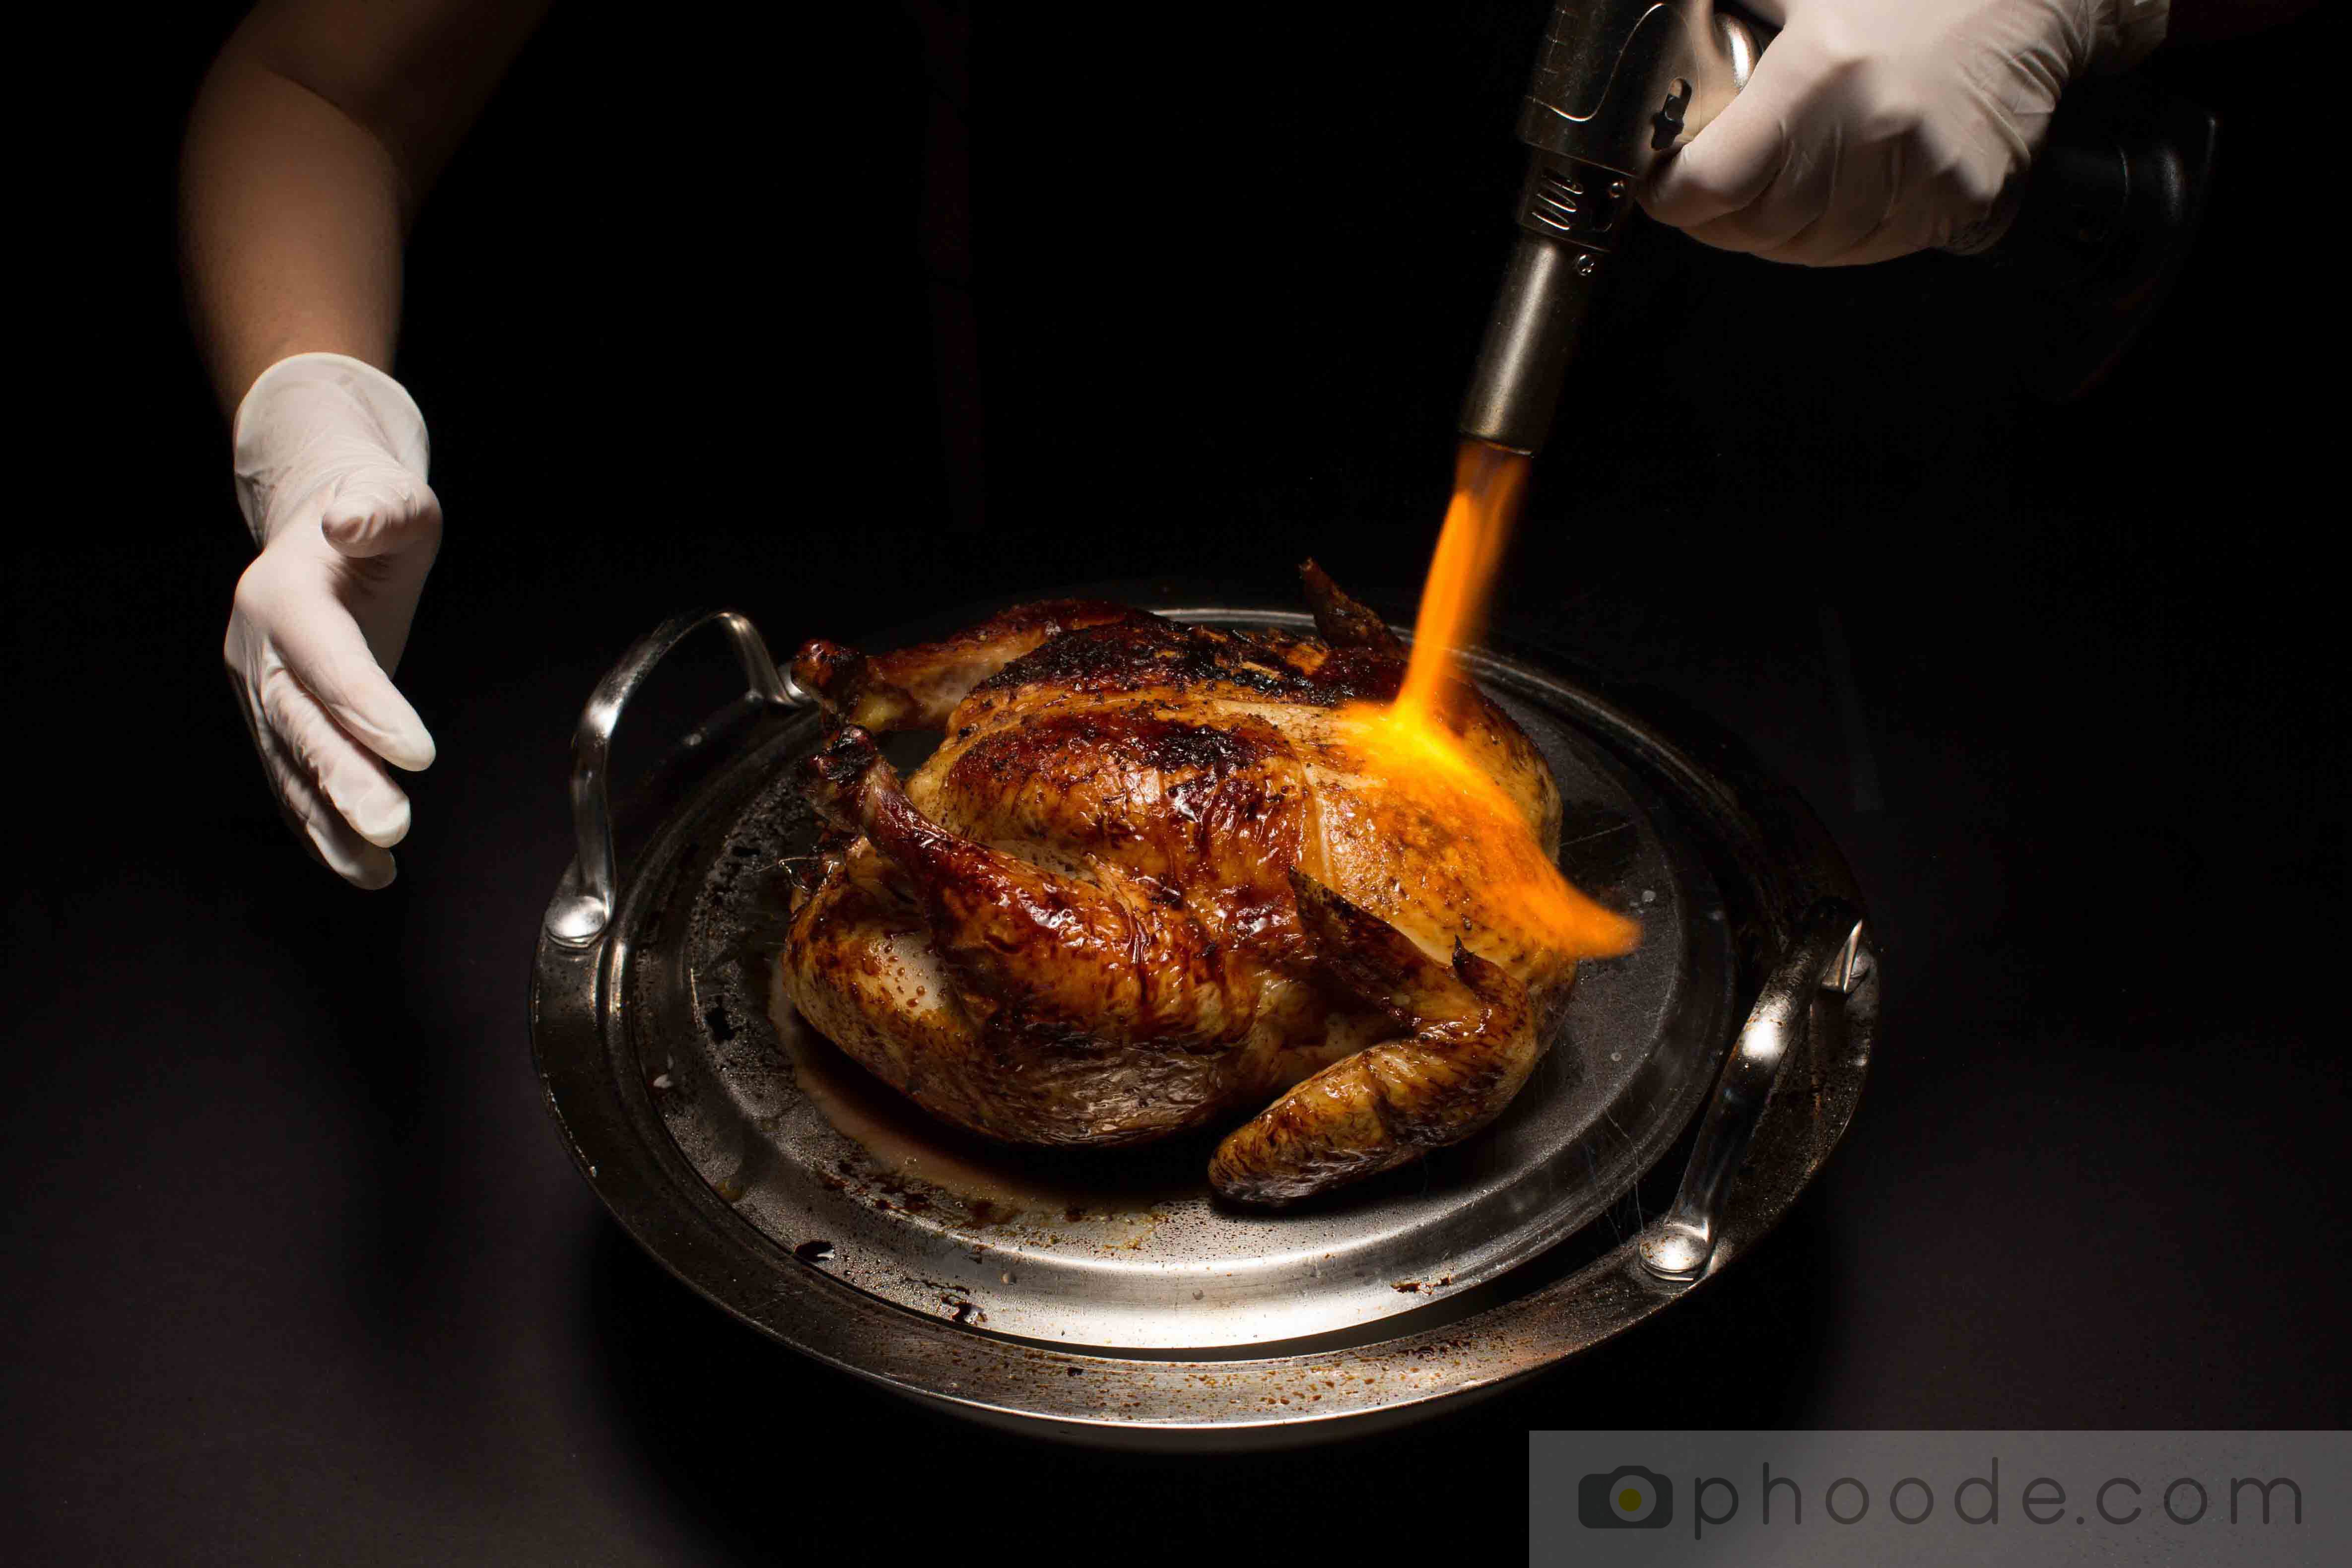 culinary torch for food styling; butane torch food styling; fake roasted chicken; faux roasted chicken; food stylists network; food stylists platform; food stylists website; food stylists club; food stylists network; food stylists platform; food stylists website; food stylists club; food stylists connection; food stylists net; food stylists home; food stylists agency; food stylists studio; food stylists hangout; food stylists hub; food stylists listing; food stylists agent; food stylists blog; what does food stylist do; learn about food styling; food styling tricks; food styling tools; food styling hacks; food stylist hacks; food styling kit; food styling toolbox; food styling secrets; food styling tricks; food styling equipment; food photography tips; learn food photography; food styling tips; food photography equipment; beginners food photography; food styling kit; food stylist; food photographer; culinary photographer; food styling school; food styling classes; food photography magazine; food photography blog; food photography contributors; food photography writers; food styling blog; food stylist life; food photography studio; food; photography contest; professional food stylist; commercial food stylist; editorial food stylist; food stylist tricks; food stylist equipment; food photography tips; learn food photography; food stylist tips; food photography equipment; beginners food photography; food stylist kit; food stylist; food photographer; culinary photographer; food stylist school; food stylist classes; food photography magazine; food photography blog; food photography contributors; food photography writers; food stylist blog; food stylist life; food photography studio; food; photography contest; professional food stylist; commercial food stylist; editorial food stylist; phoode; website for food creatives; phoode creatives